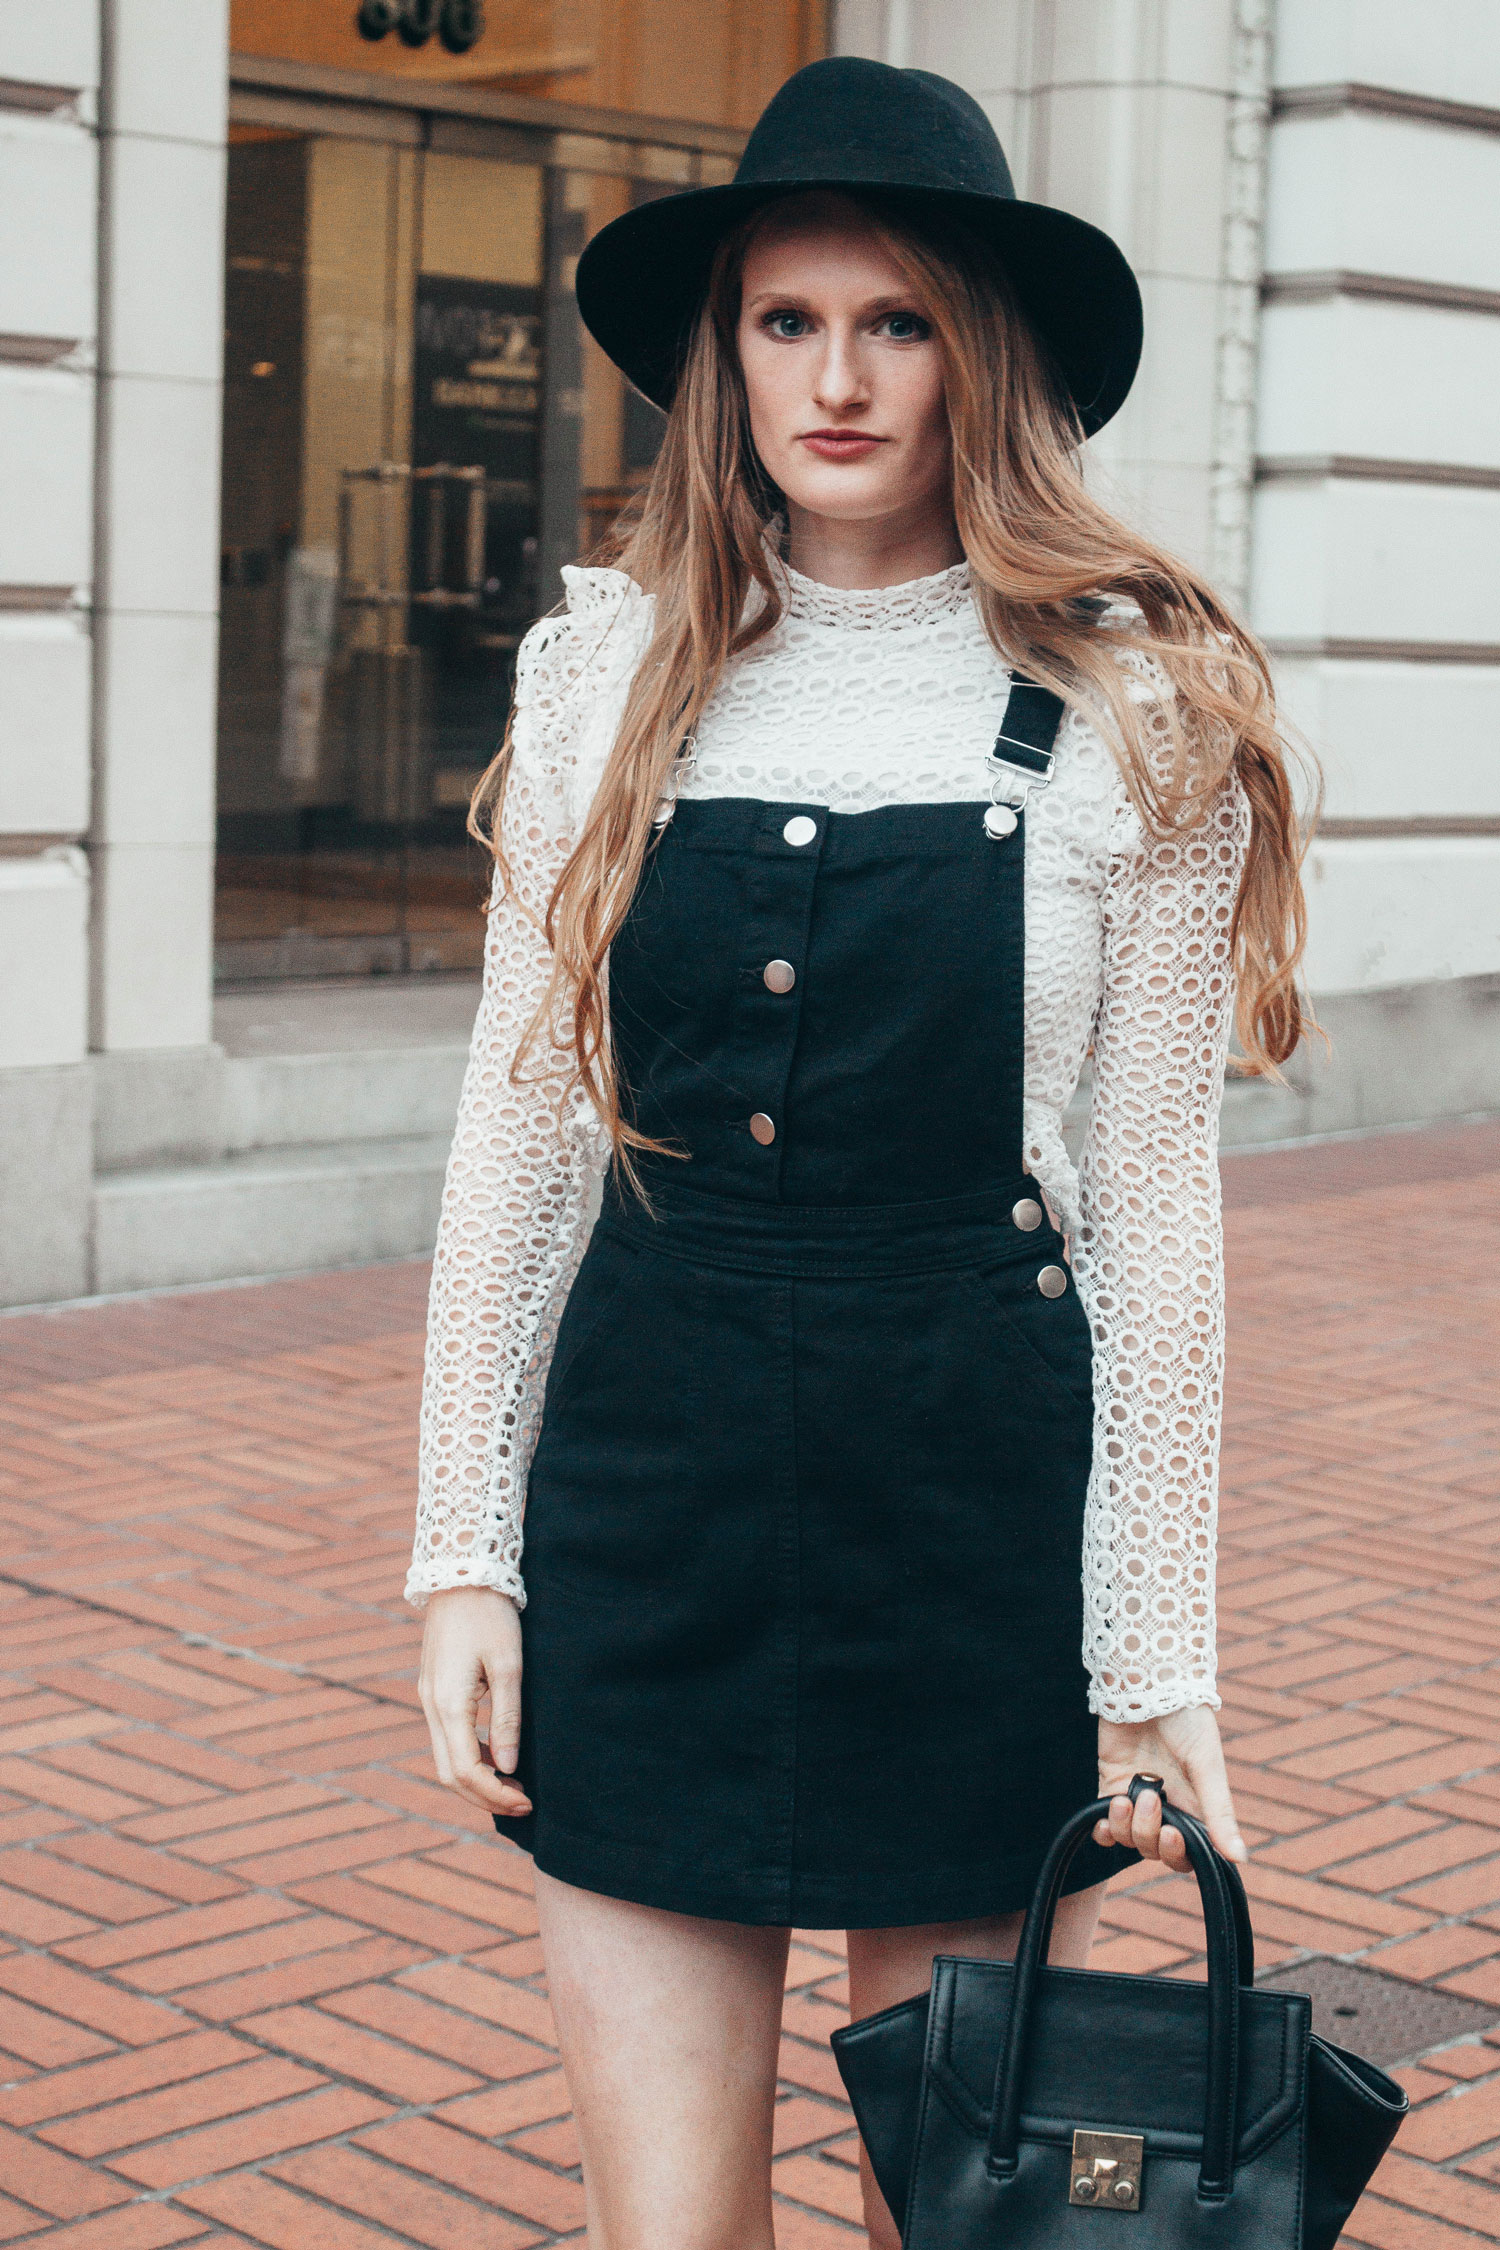 How To Style A Black and White Summer Outfit